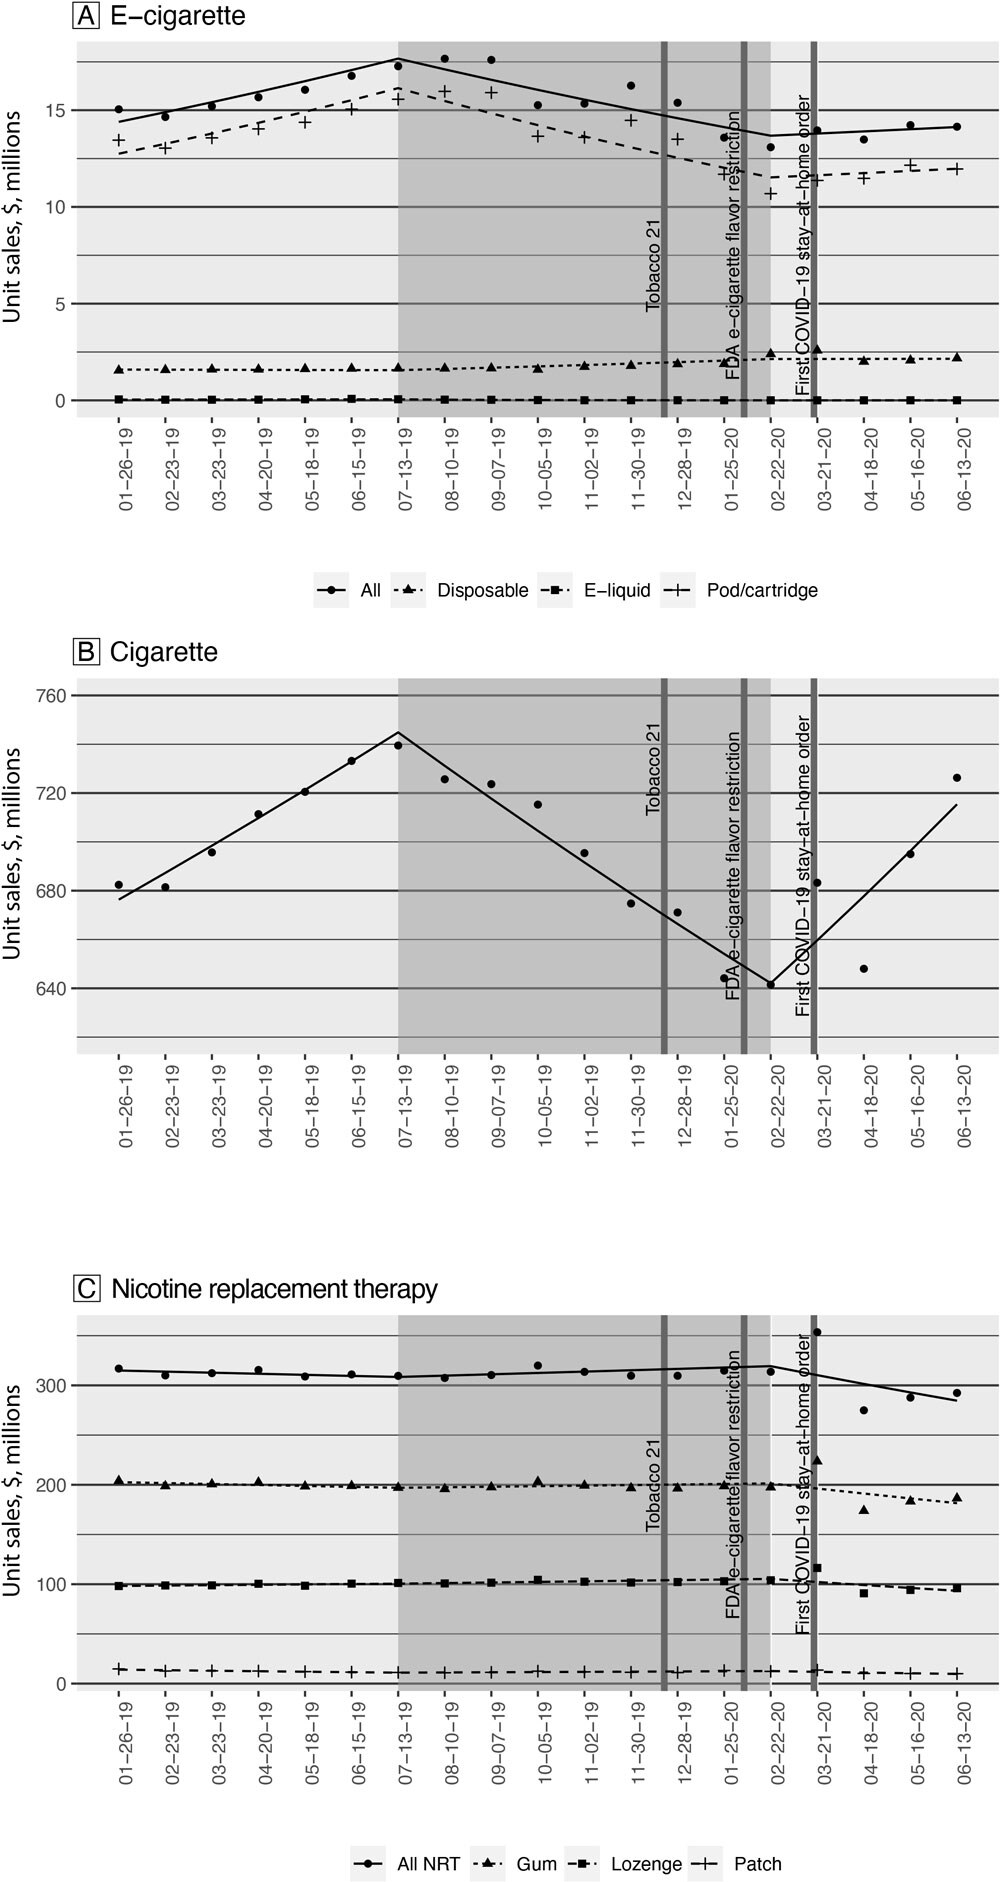 Monthly unit sales of A) e-cigarettes, B) cigarettes, and C) over-the-counter (OTC)–NRT, by product type before, during, and after the EVALI outbreak. Geometric shapes indicate observed sales, and lines indicate predicted sales based on the interrupted time series (ITS) model. The dates on the x axis are ending dates of each 4-week period. The dark-gray box indicates the period “during” the outbreak. Unit sales were calculated per 4-week period. One unit of e-cigarette products equals 1 disposable e-cigarette, 1 e-liquid bottle, or 5 prefilled pods/cartridges. Cigarette units were standardized as 1 unit equals 1 pack of cigarettes, which typically contains 20 to 25 cigarettes. OTC-NRTs included nicotine patch, gum, and lozenge. One unit of NRT products equals 1 nicotine patch with 7 mg nicotine strength, or 1 nicotine lozenge or 1 nicotine gum with 2 mg nicotine strength each. Abbreviations: FDA, Food and Drug Administration; NRT, nicotine replacement therapy; Tobacco 21, passage of federal legislation that increased the legal tobacco purchase age to 21.